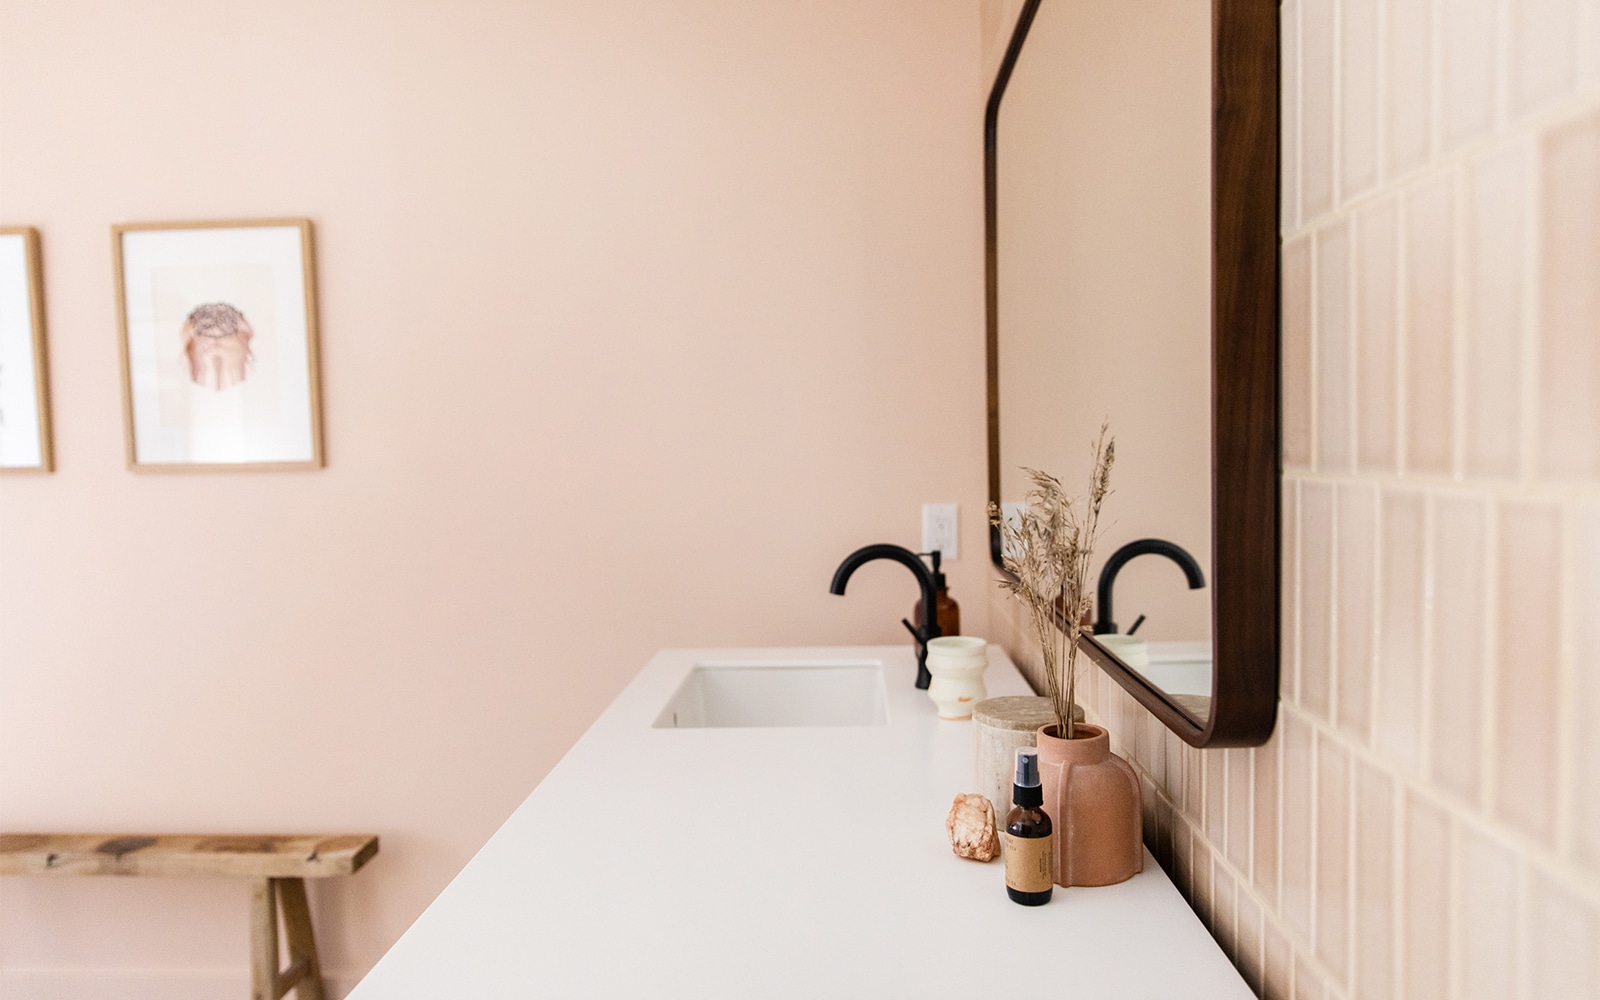 Our Basement Bathroom - Made with Fireclay Tile